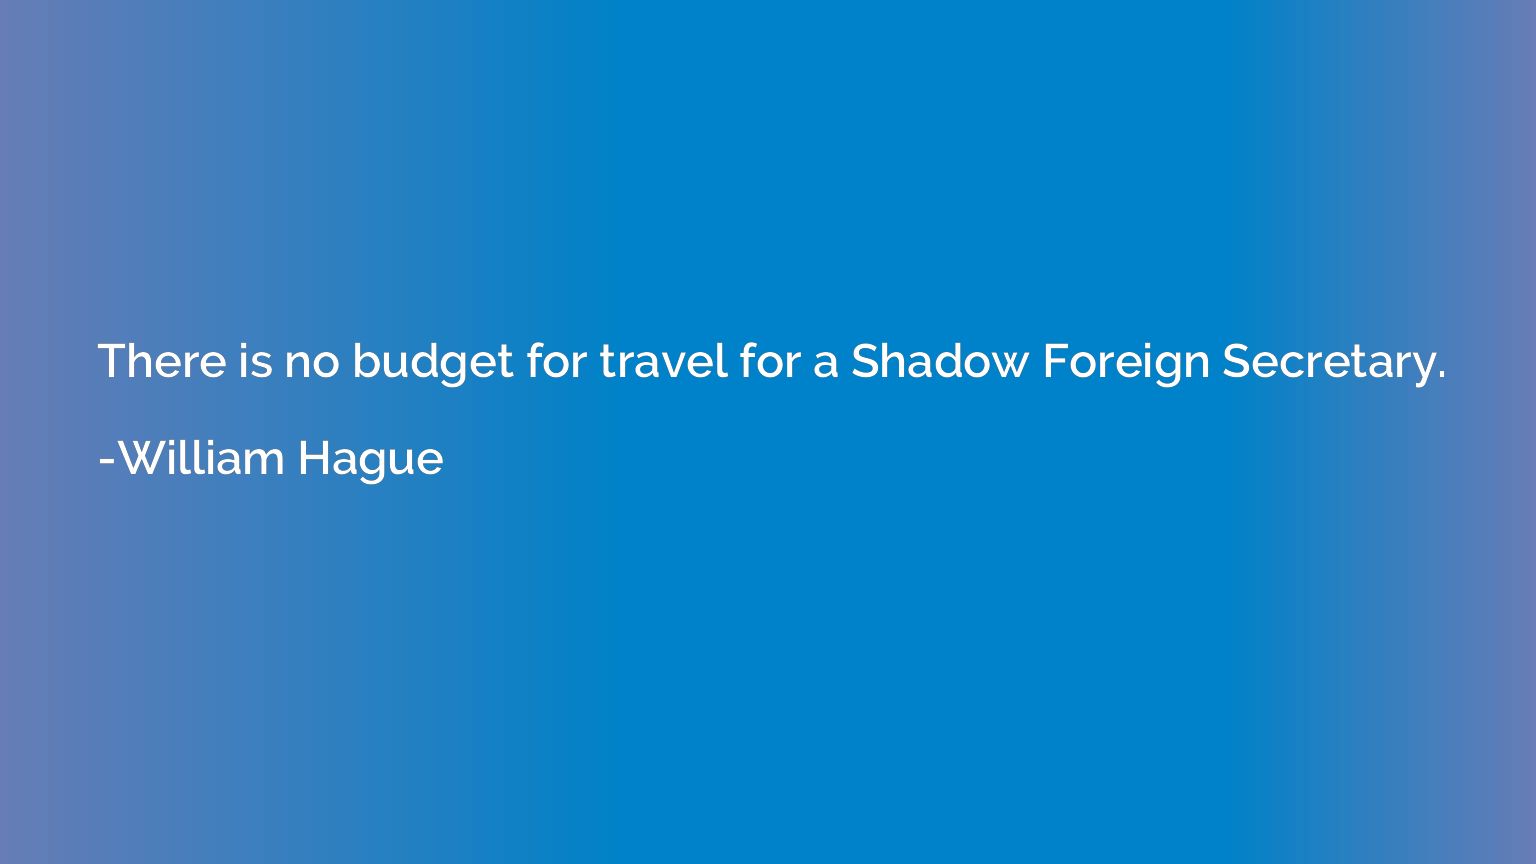 There is no budget for travel for a Shadow Foreign Secretary